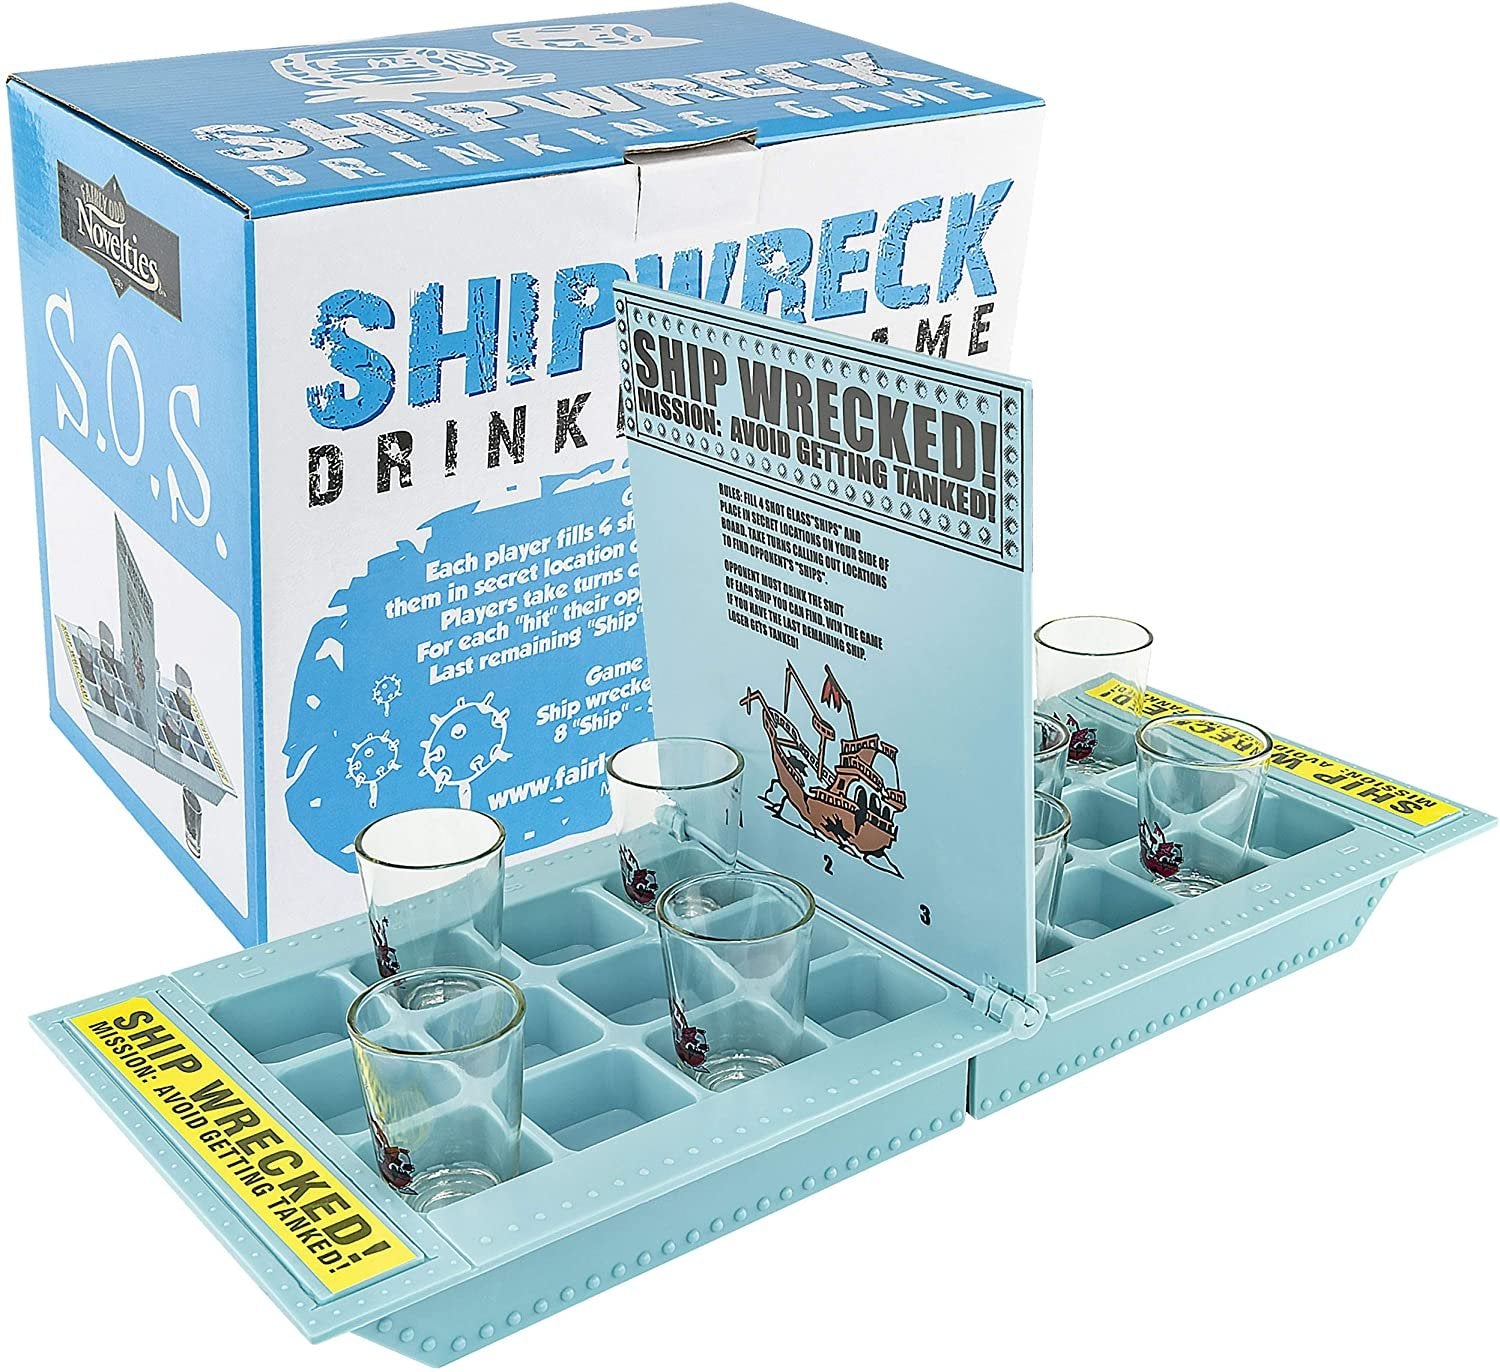 This Game Will Make You Drink, Board Game